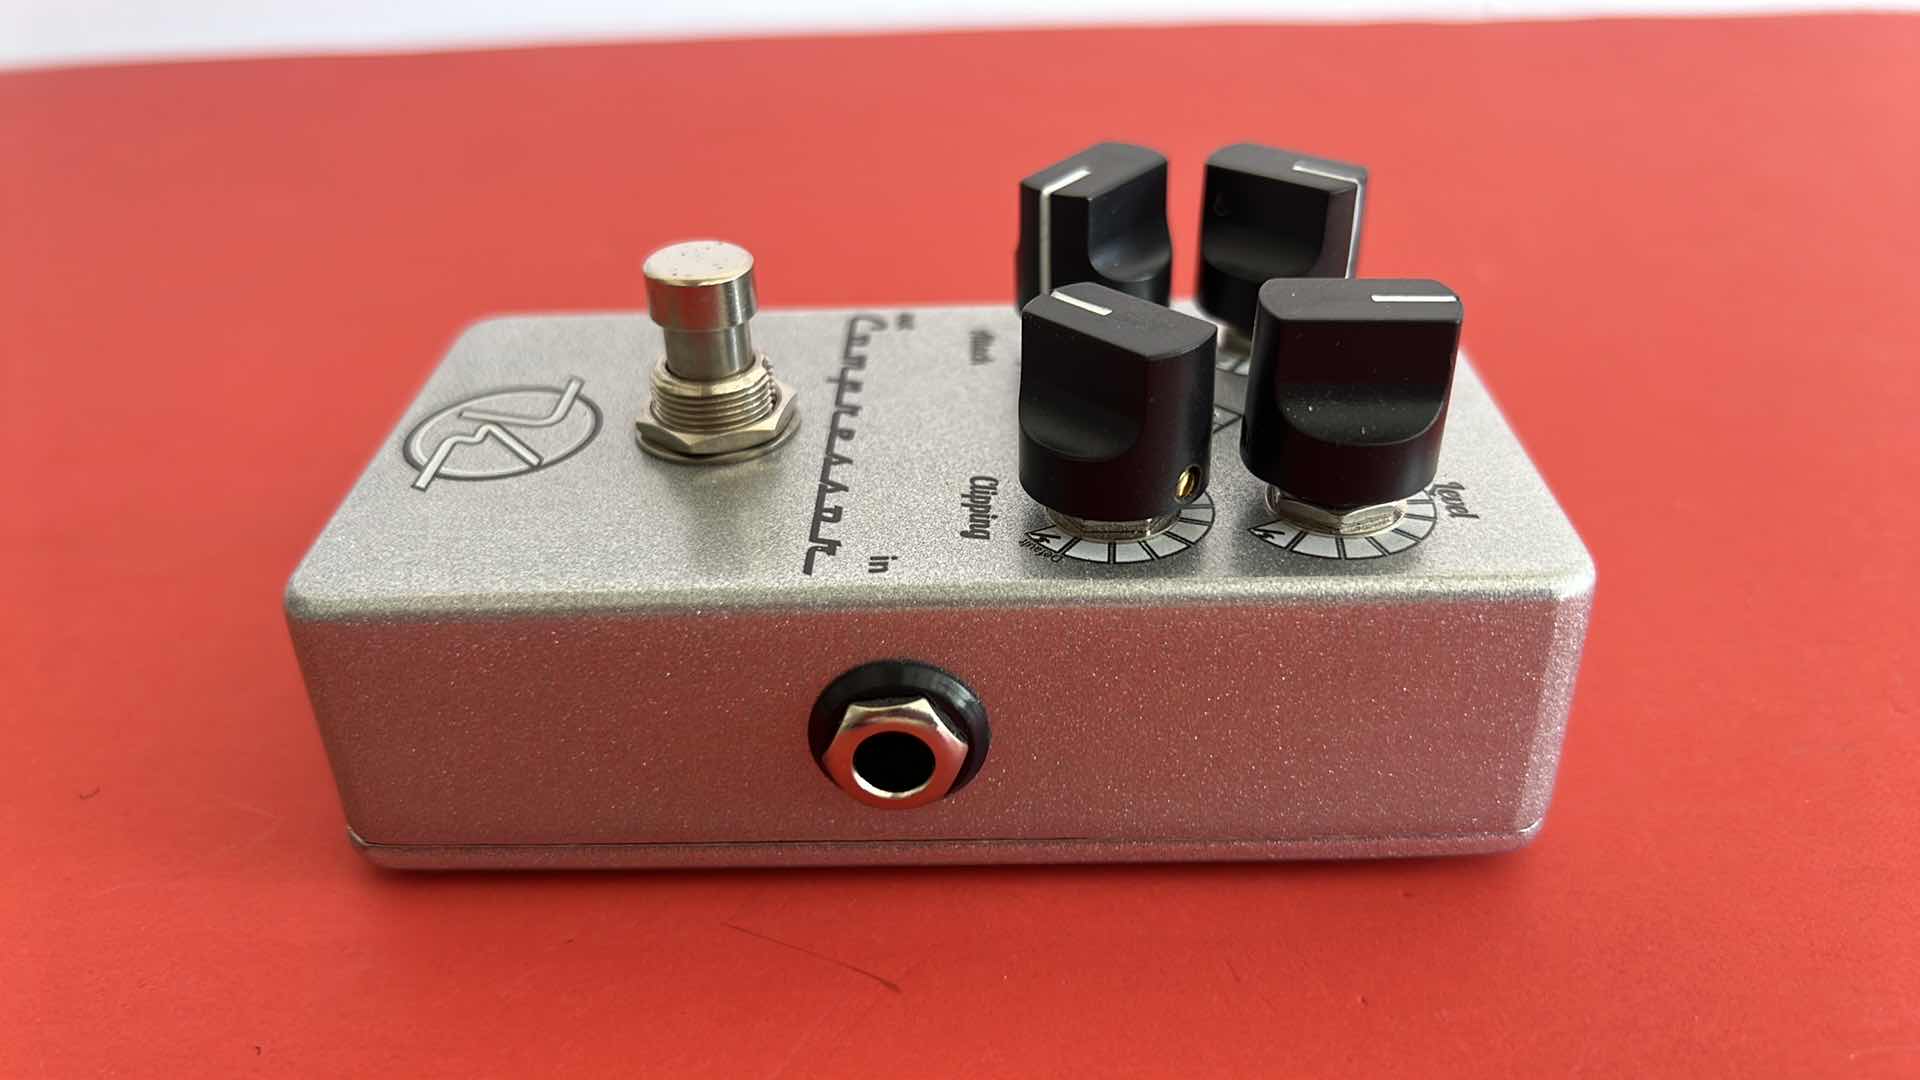 Photo 3 of KEELY ELECTRONICS C4 COMPRESSOR GUITAR PEDAL